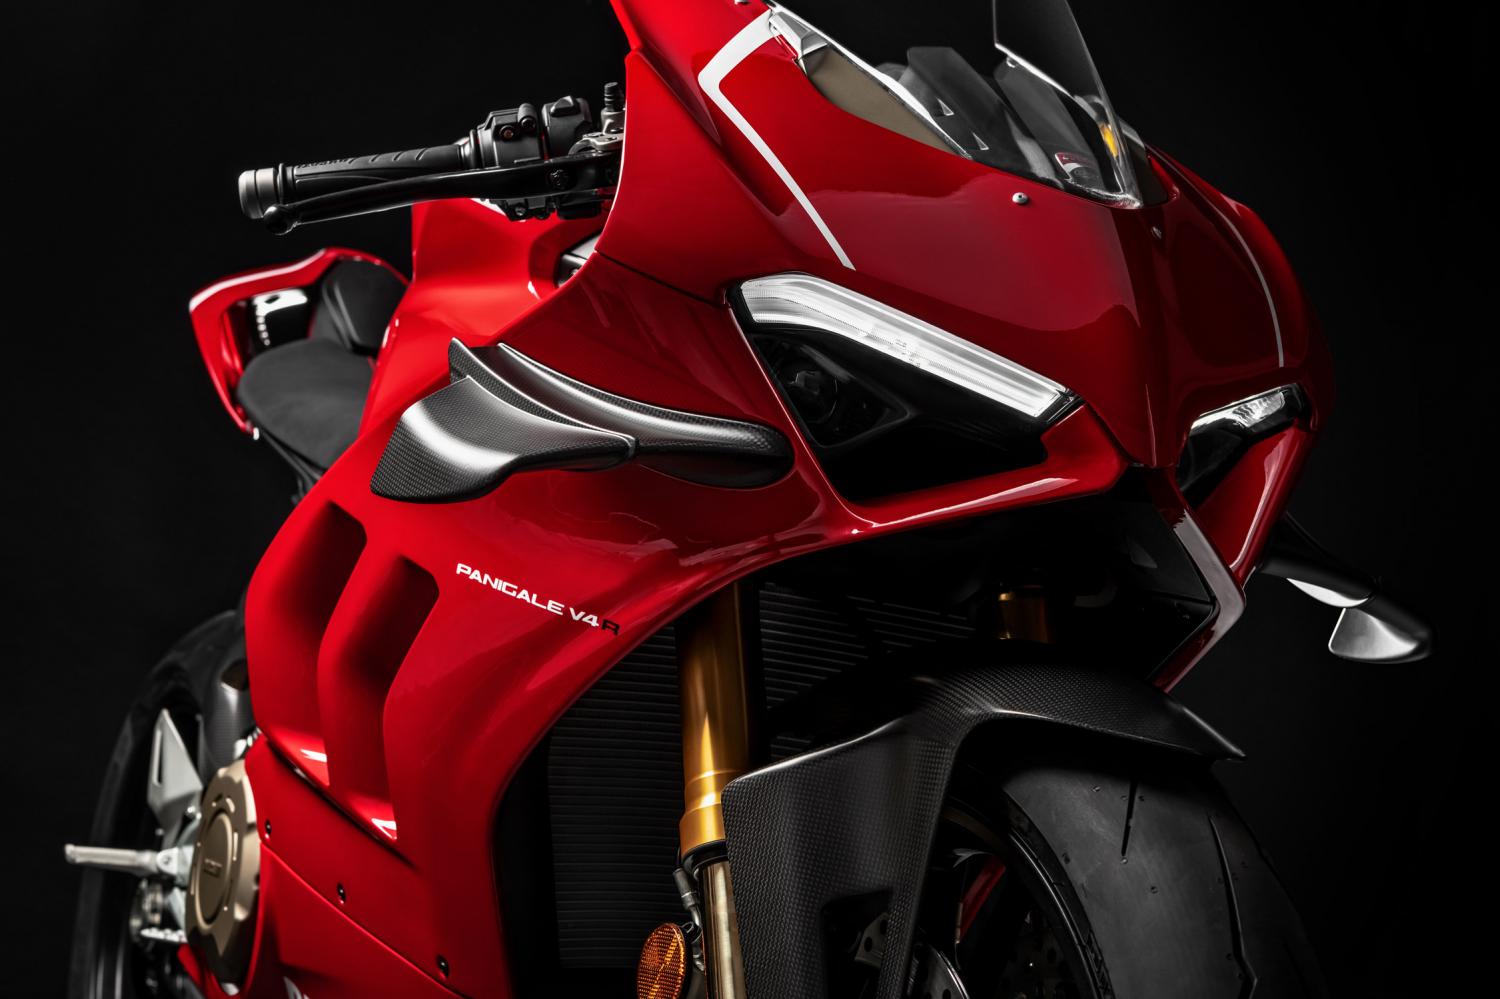 20ducati-panigale-v4-ruc69212preview.jpg